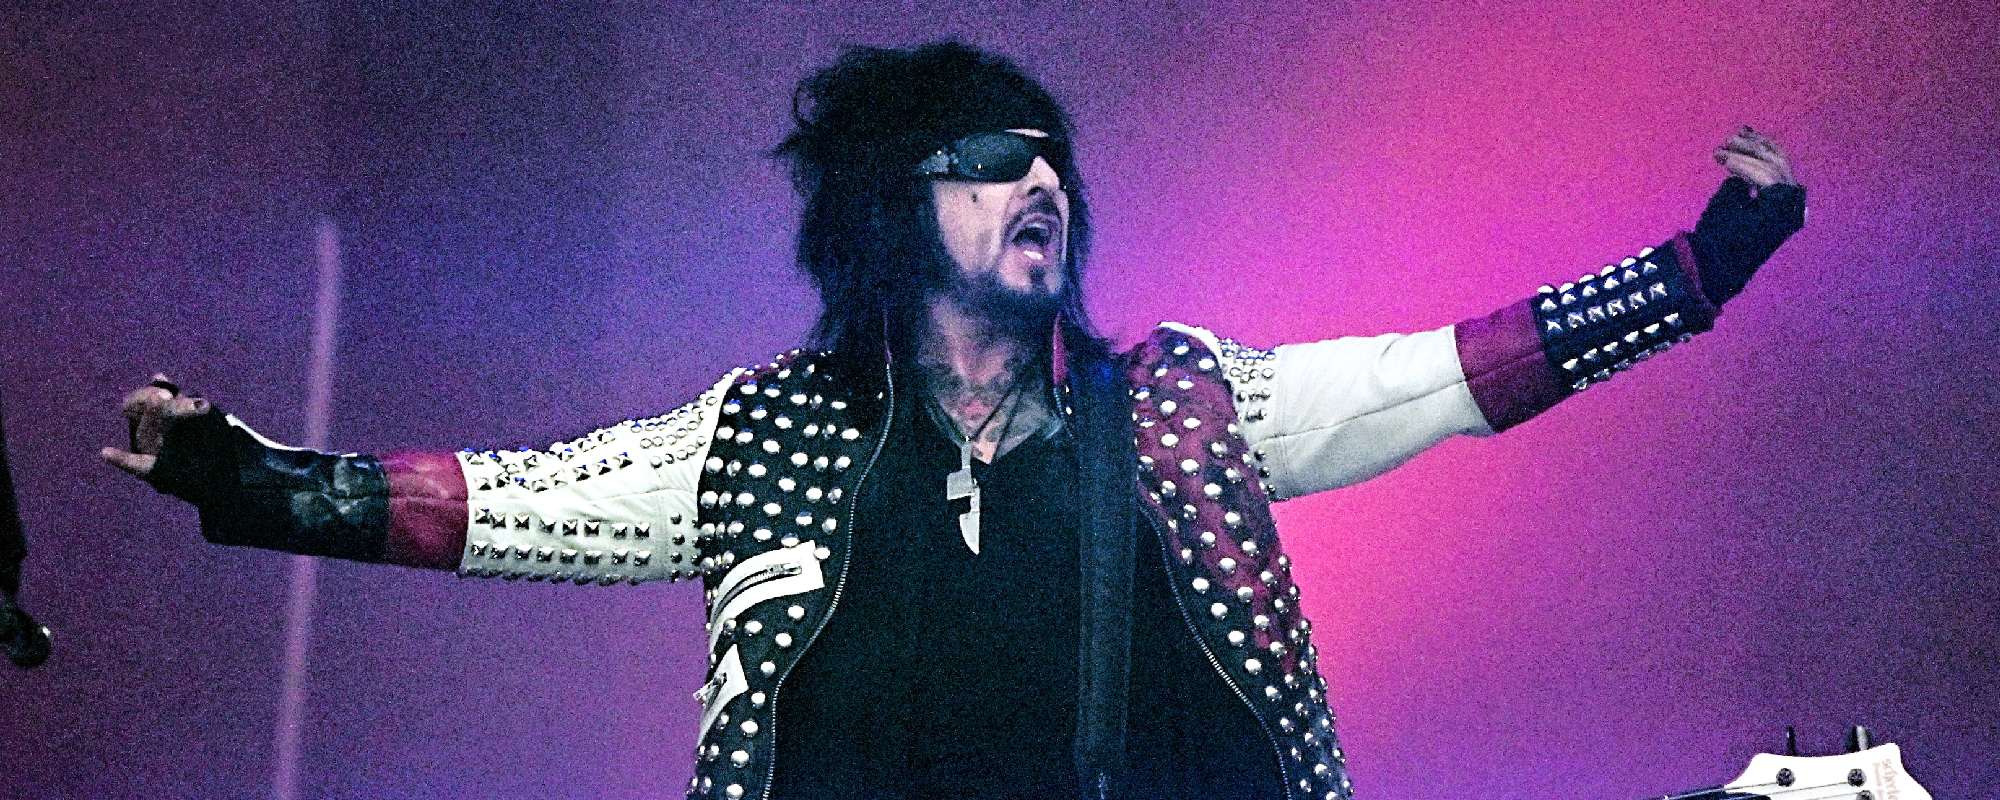 Nikki Sixx Discusses the Decision To Replace Mick Mars With John 5: "It Was Hard"